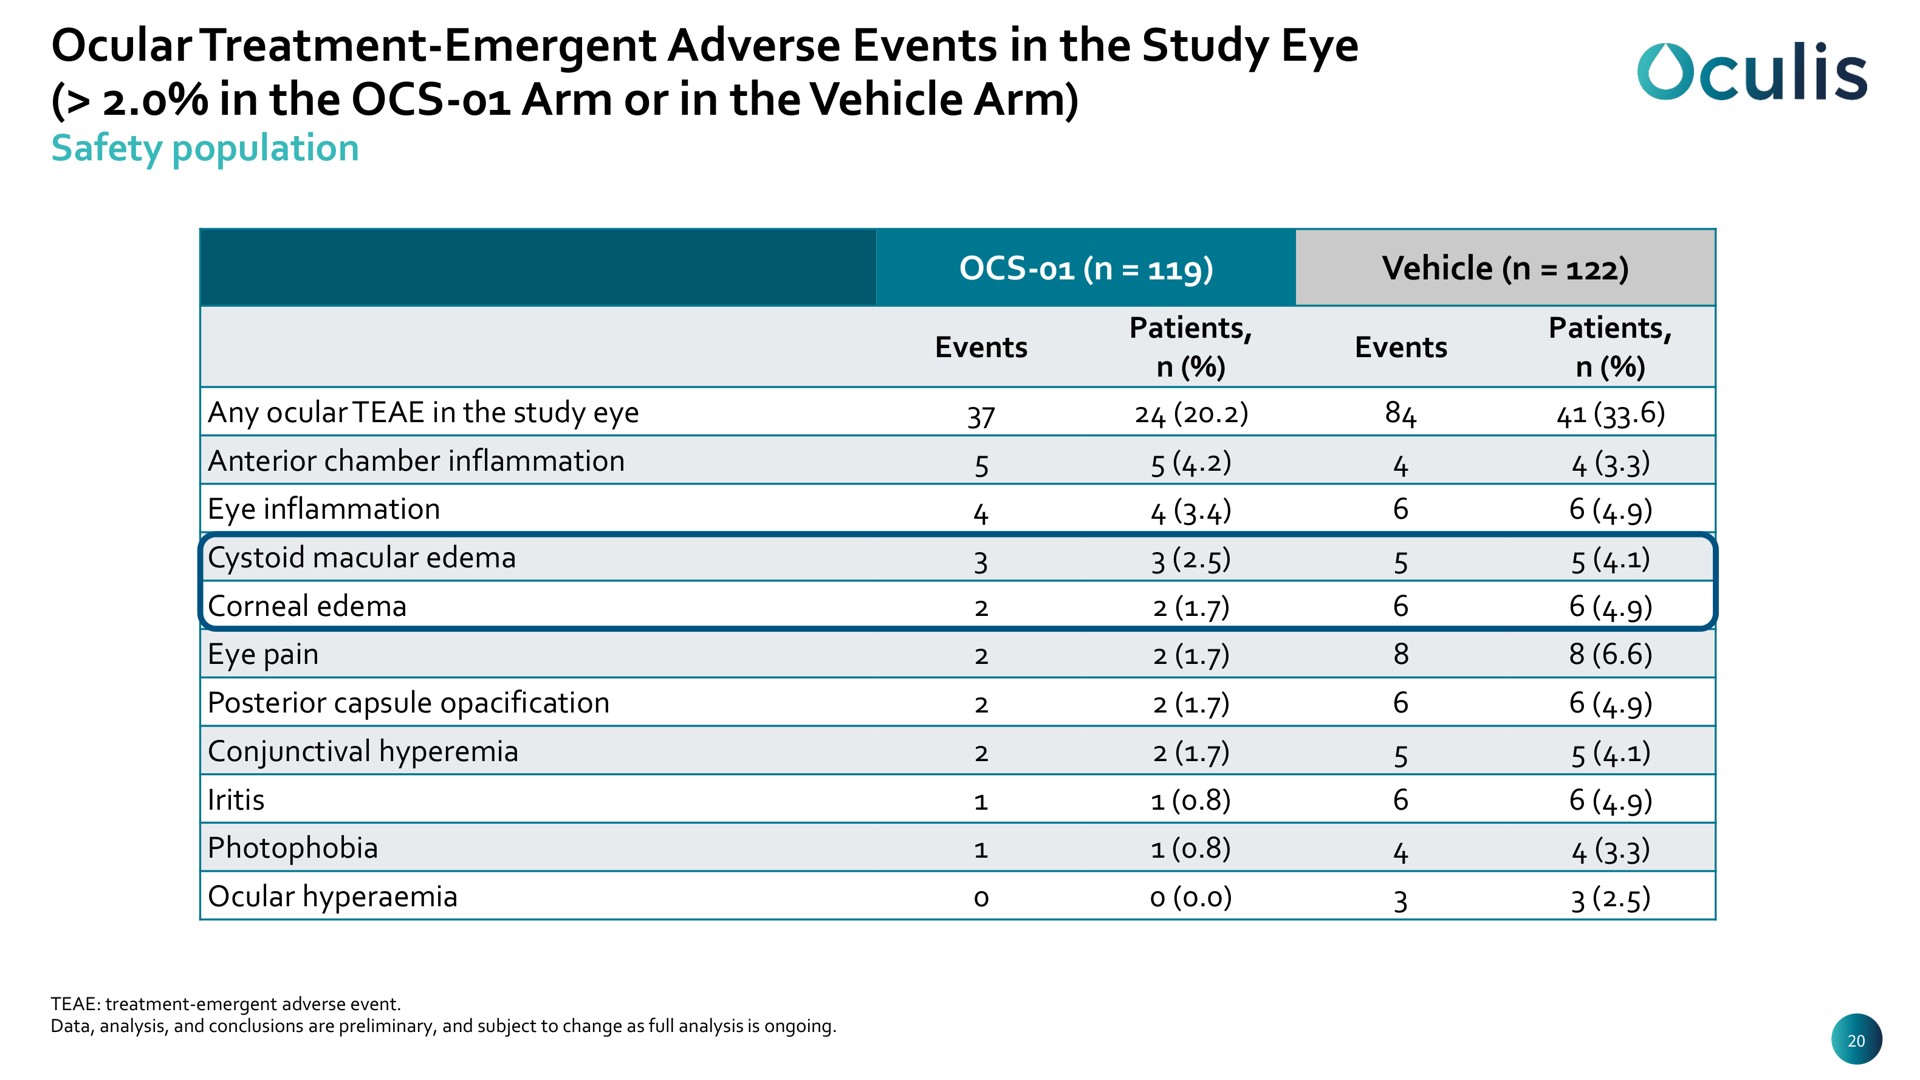 ocular treatment emergent adverse events in the study eye in the arm or in the vehicle arm | Oculis